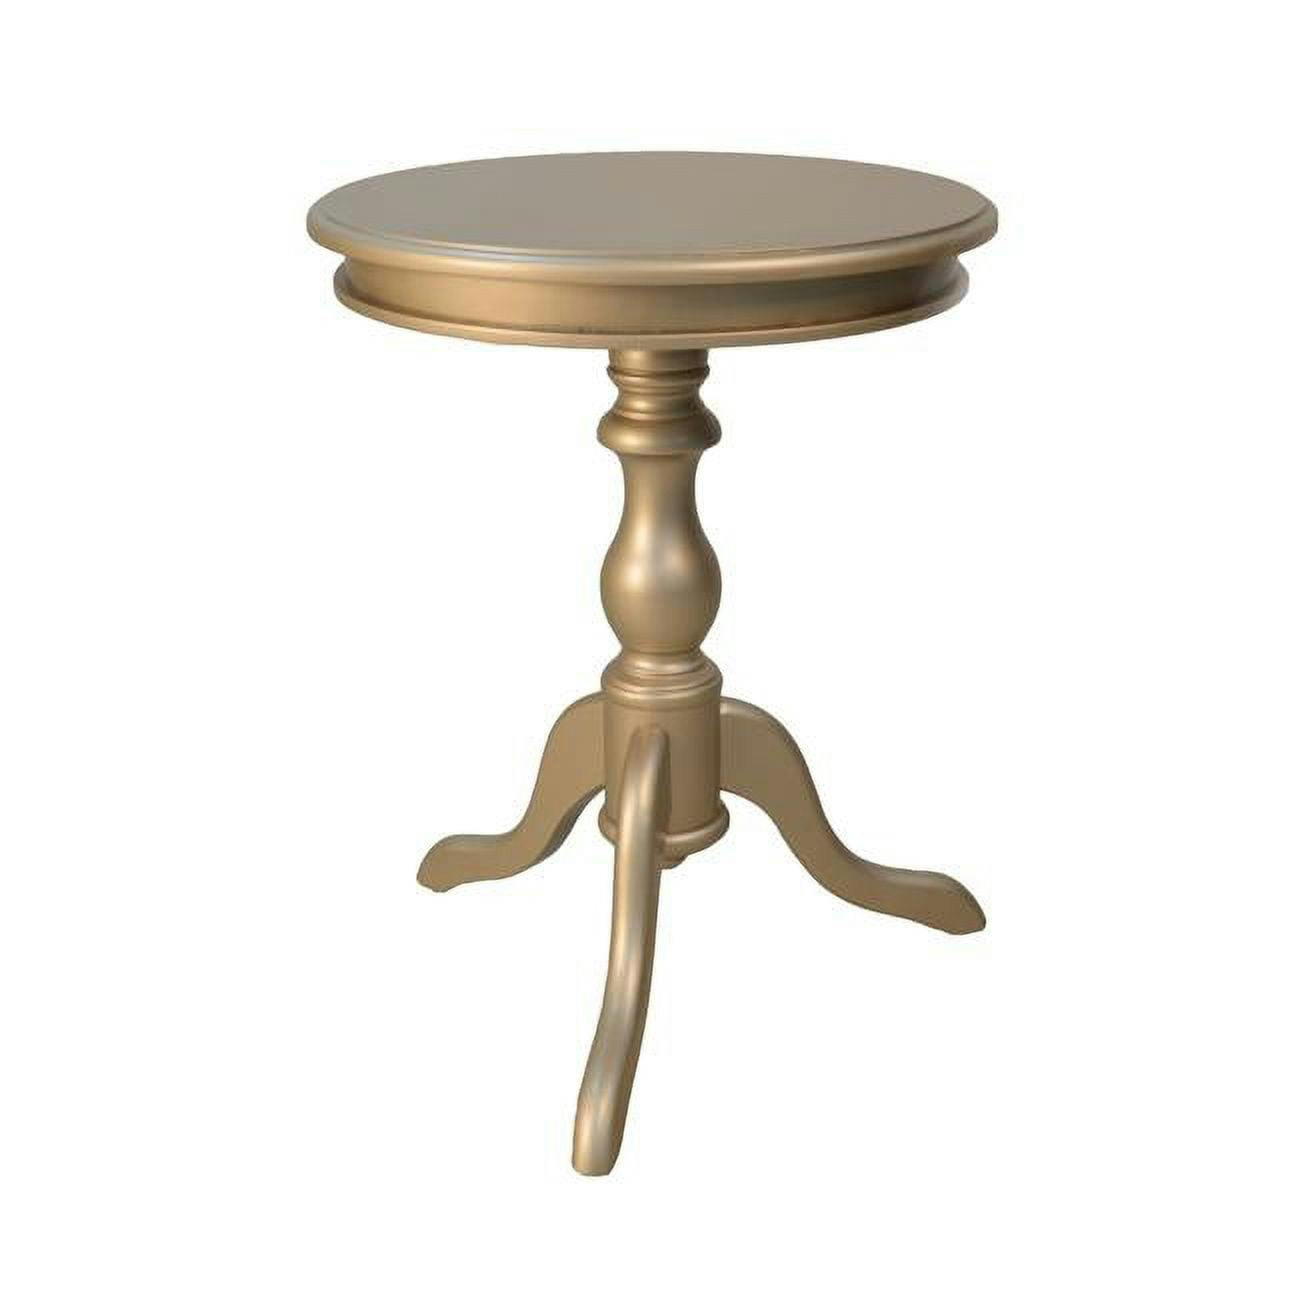 Gilda Champagne Round Pedestal Side Table with Turned Base